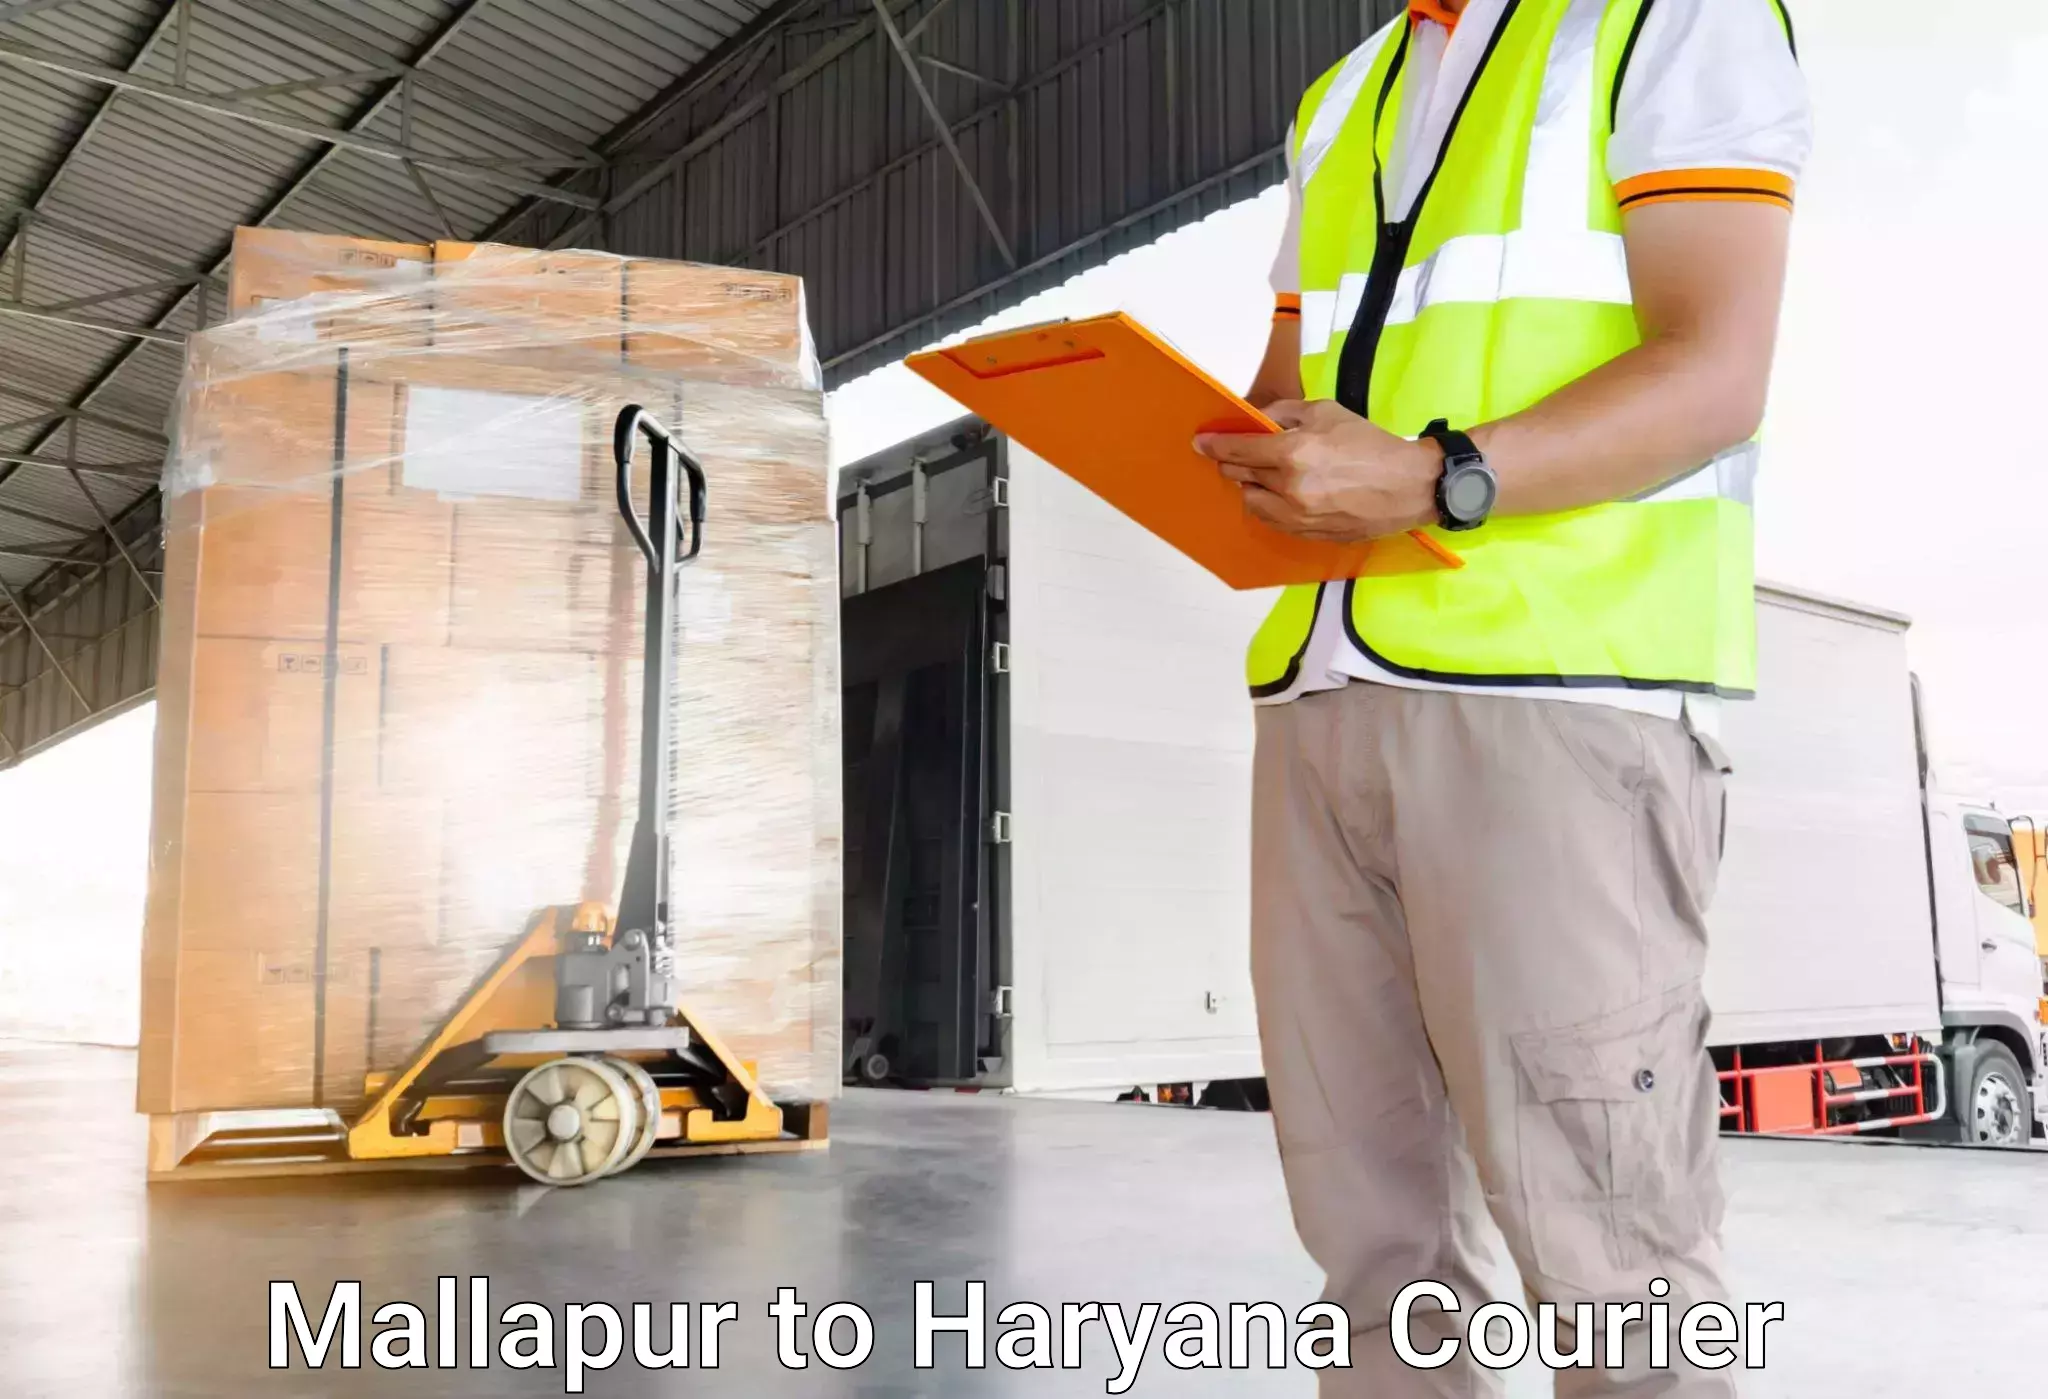 Business luggage transport in Mallapur to Haryana